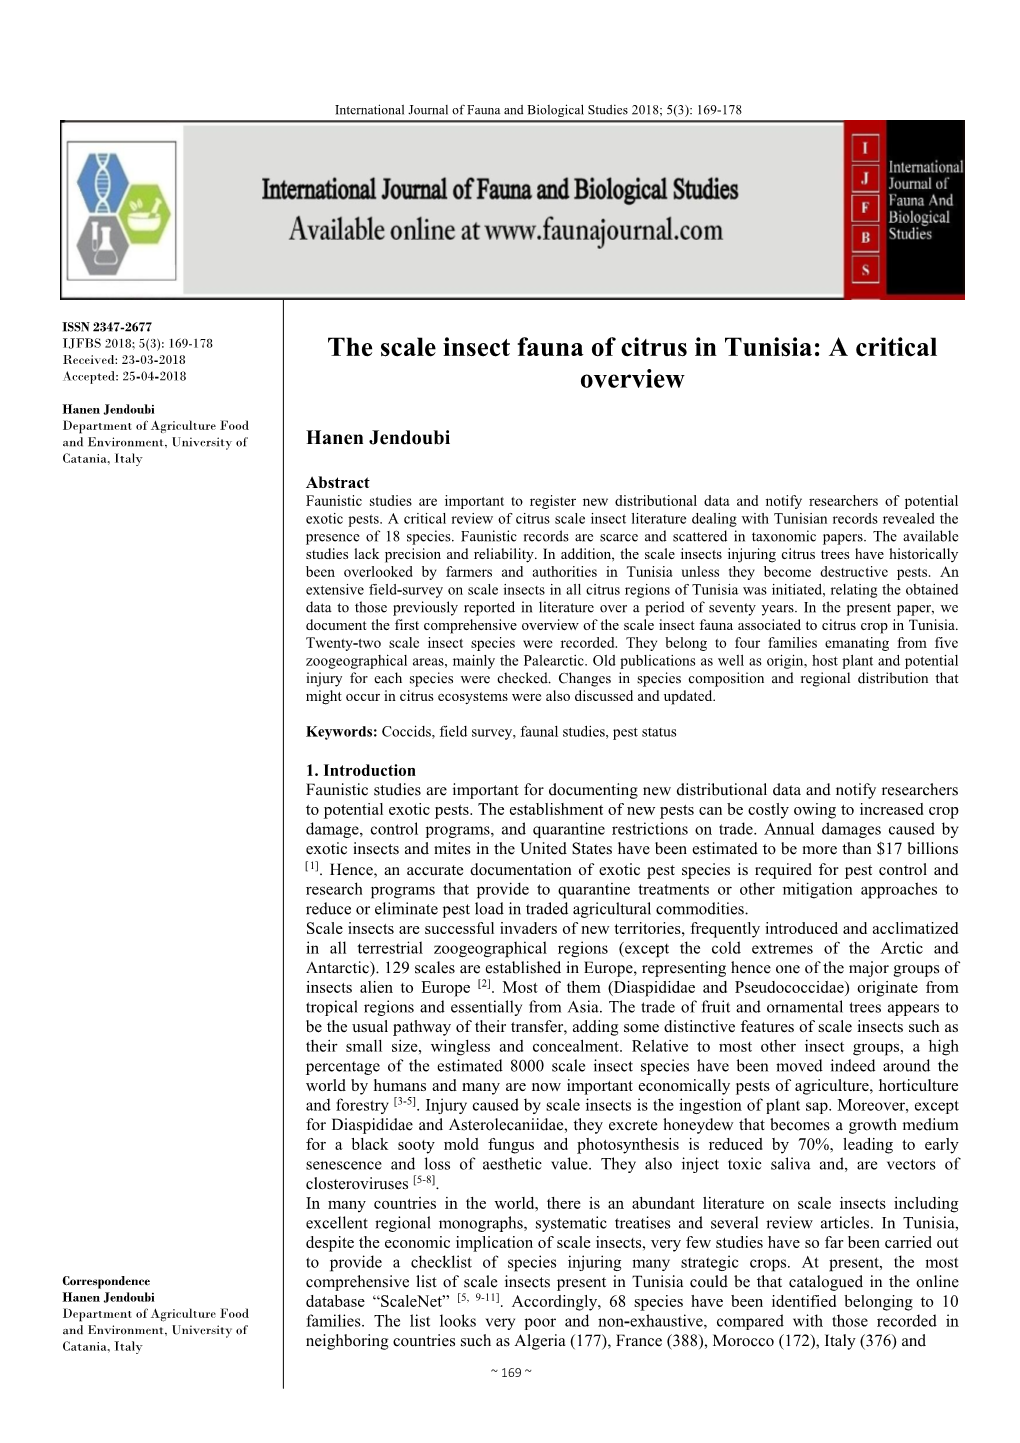 The Scale Insect Fauna of Citrus in Tunisia: a Critical Overview